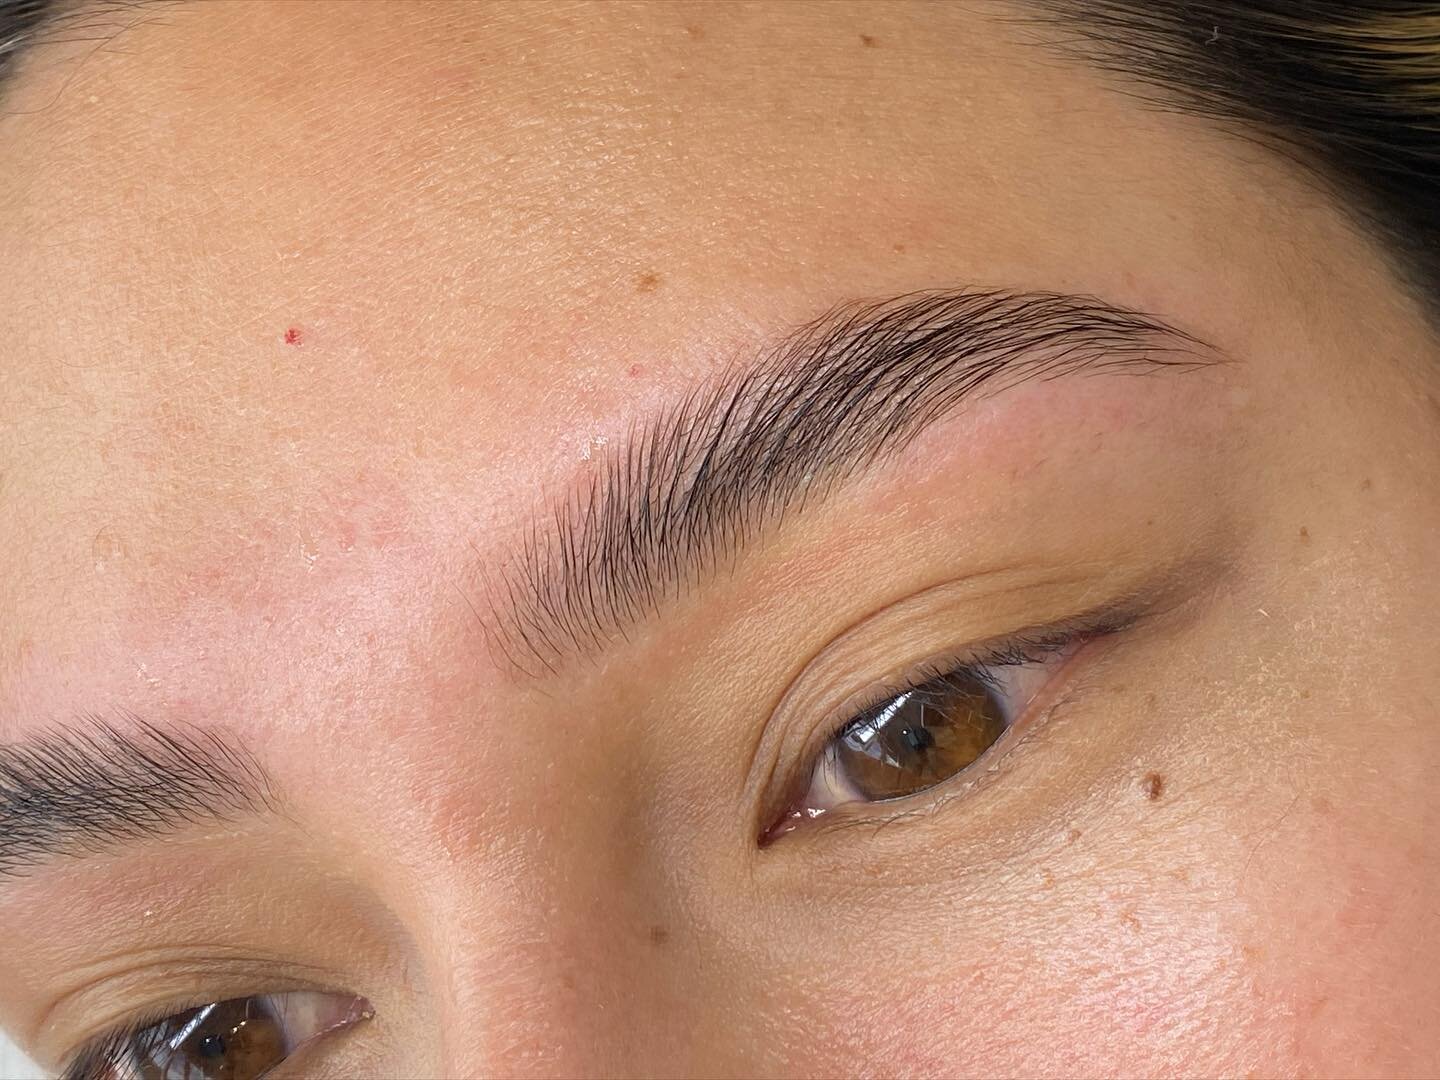 An exquisite example of how versatile #browlamination is! I always style my clients brows tailored to their own individuality- eyebrows aren&rsquo;t one size fits all! For this client, she asked for a bit of an arch, full brows with a bit of tint to 